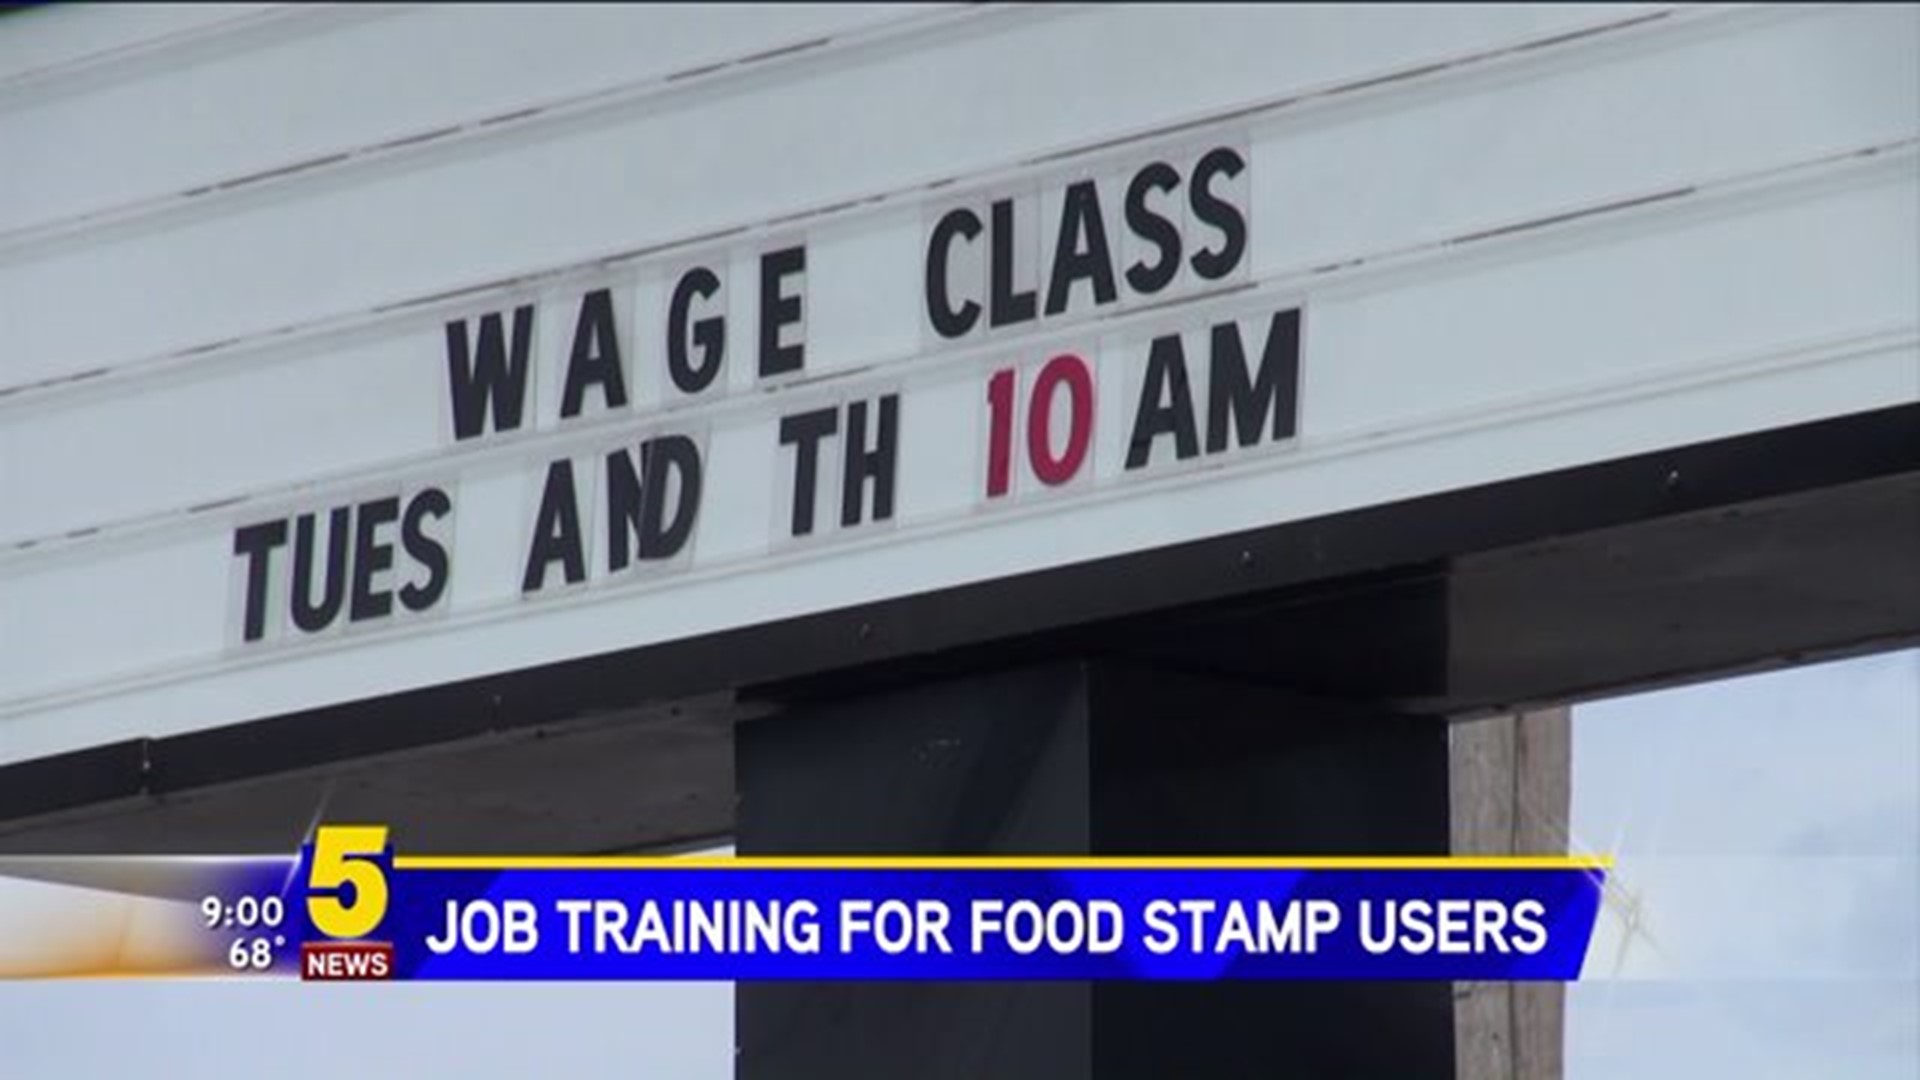 Job Training For Food Stamp Users